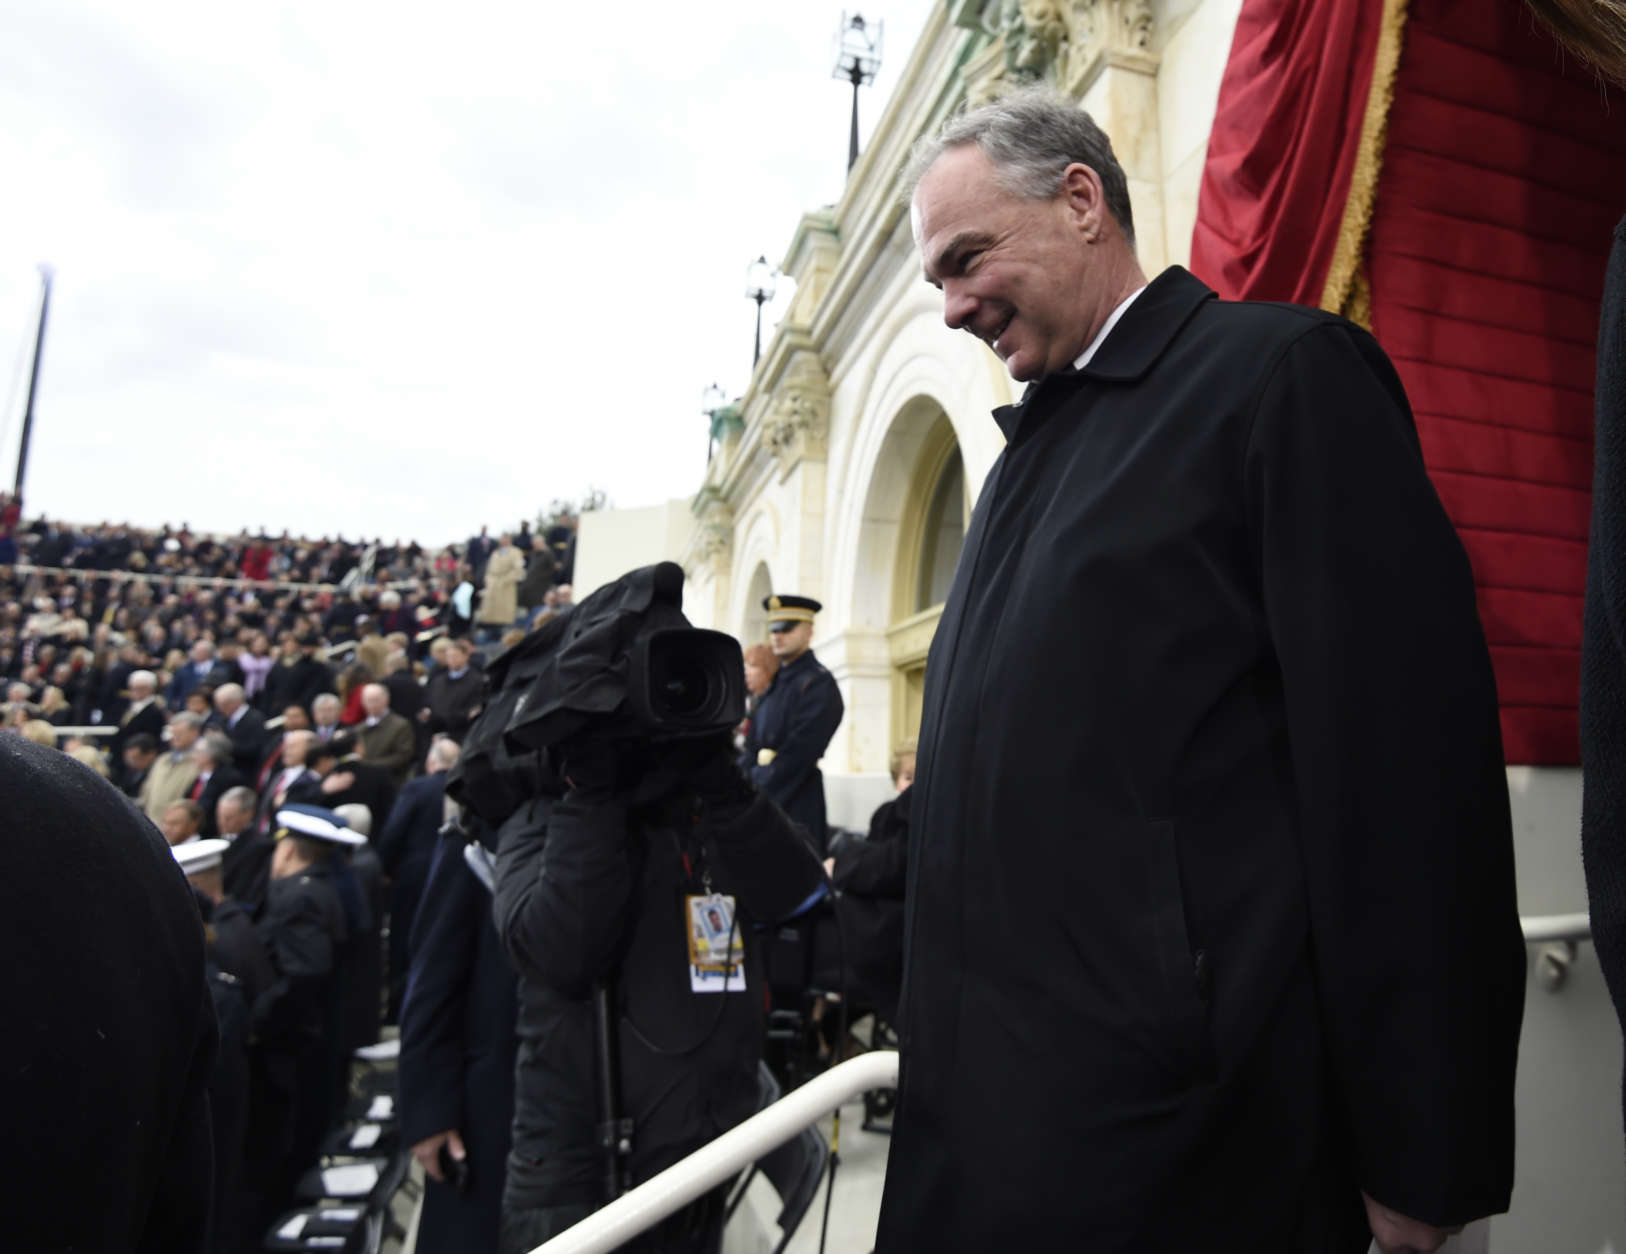 WASHINGTON, DC - JANUARY 20: US Senator Tim Kaine arrives for the Presidential Inauguration of Donald Trump at the US Capitol on January 20, 2017 in Washington, DC. Donald J. Trump will become the 45th president of the United States today.  (Photo by Saul Loeb - Pool/Getty Images)